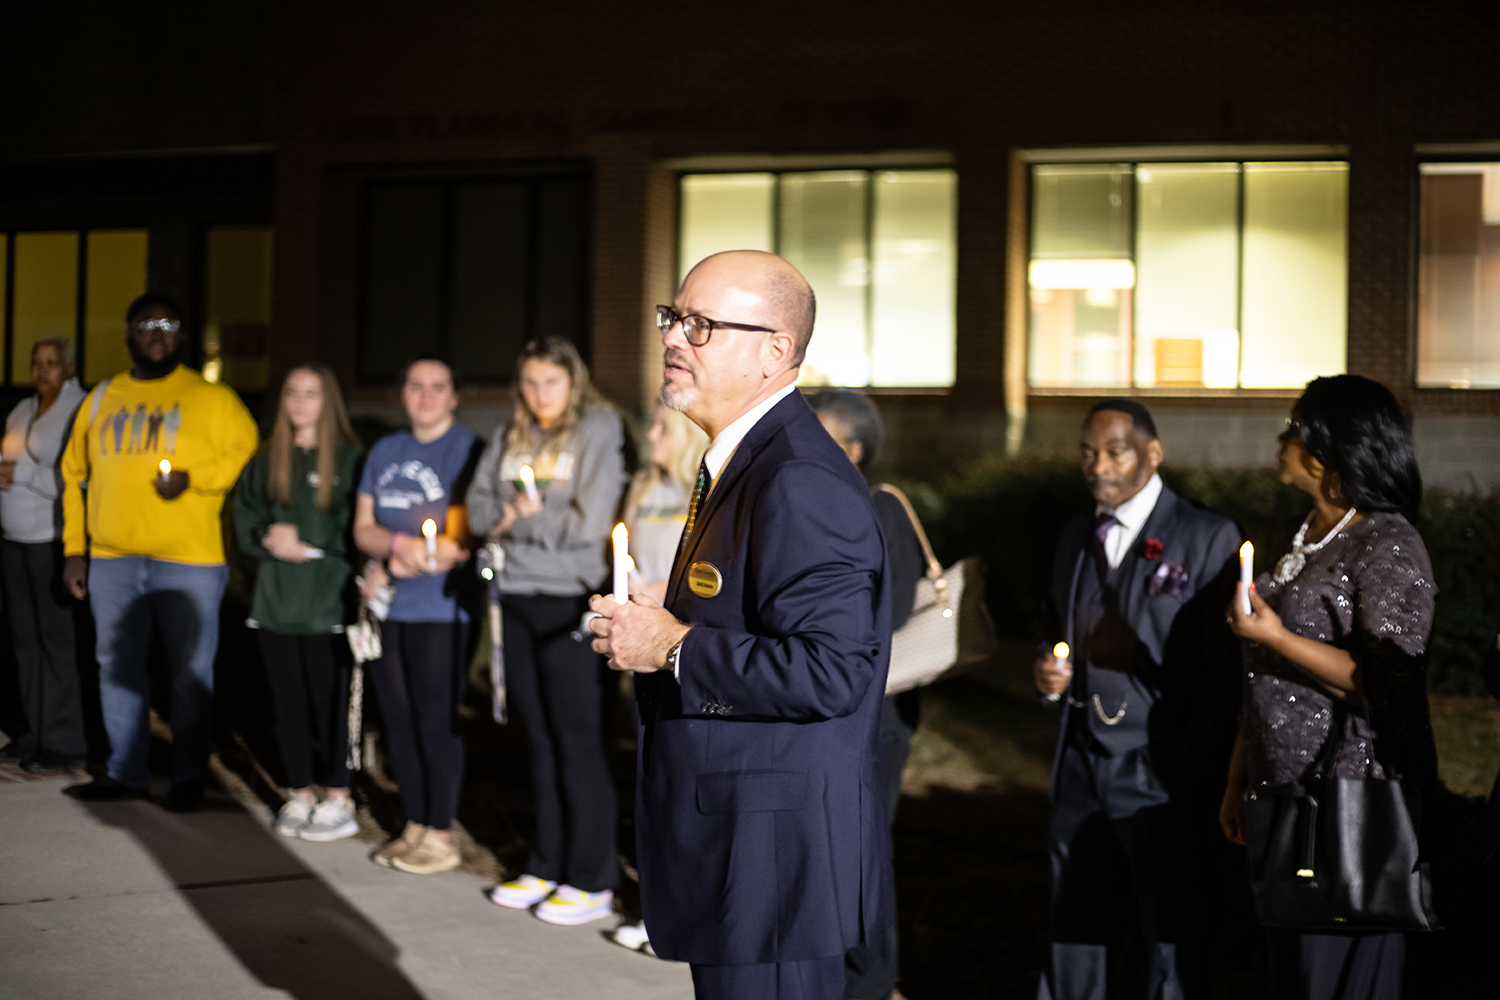 Dr. Schecter at candlelight vigil